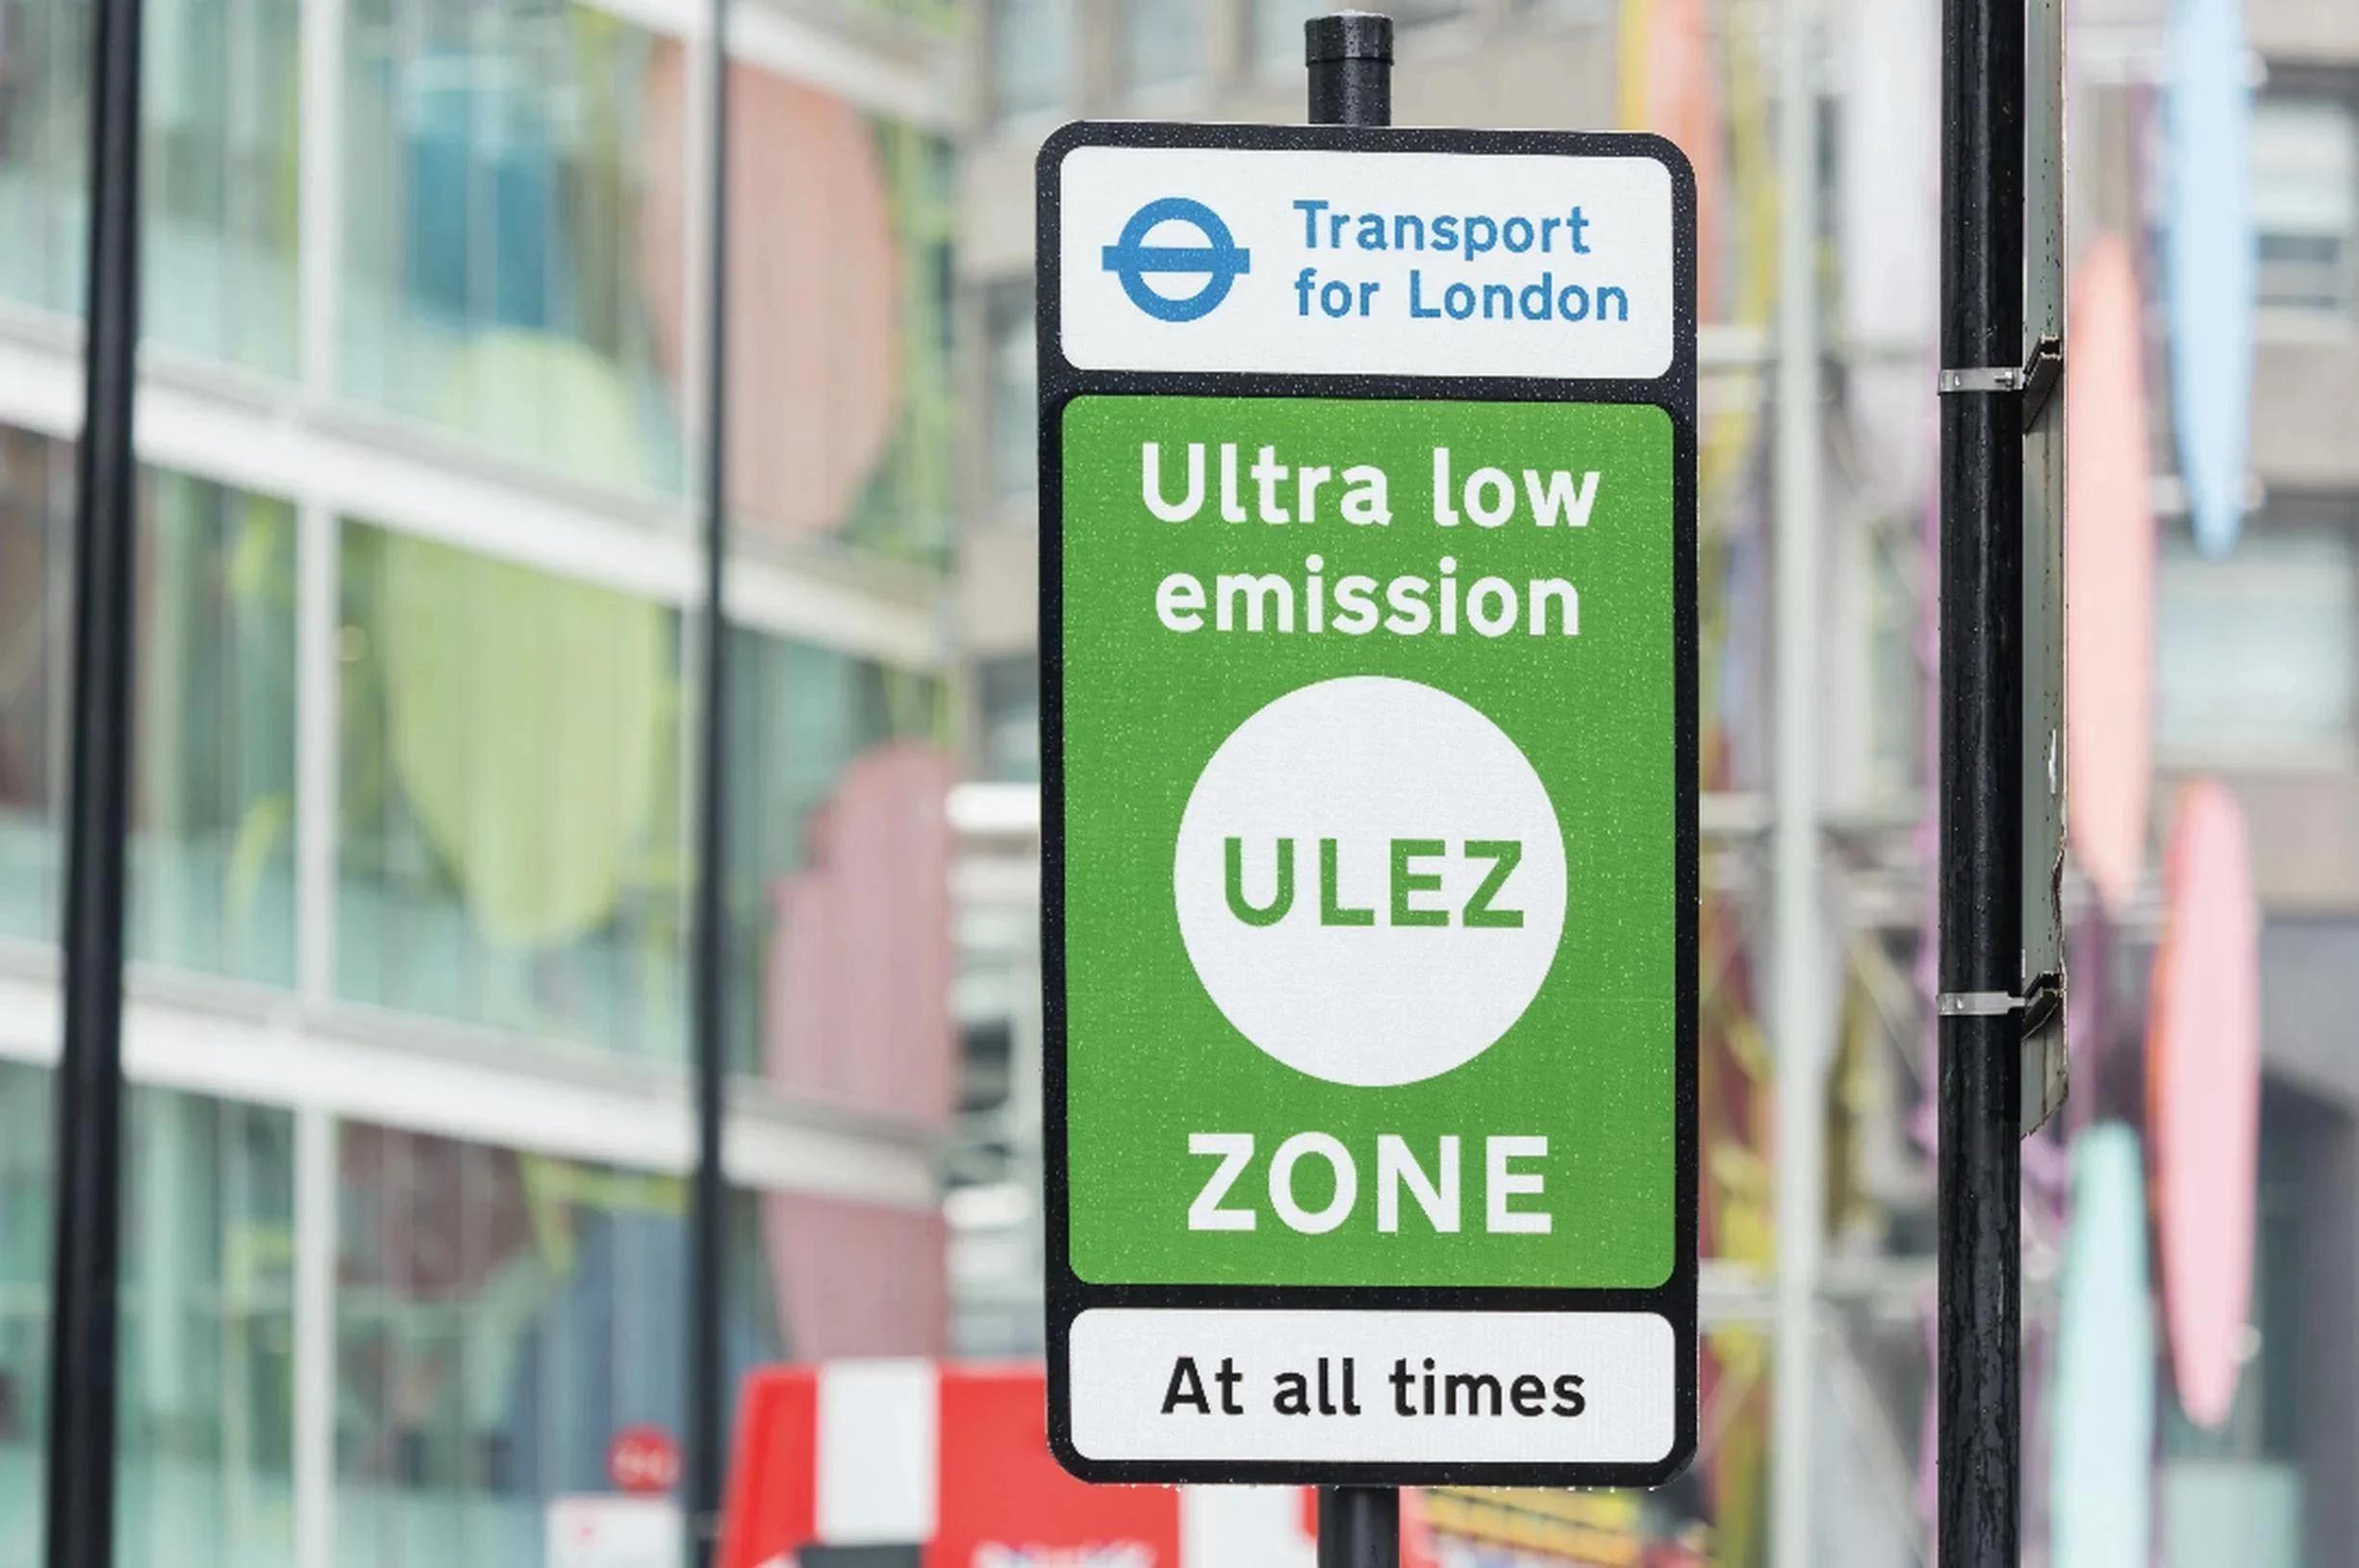 The ULEZ is due to expand to cover all London boroughs on 29 August